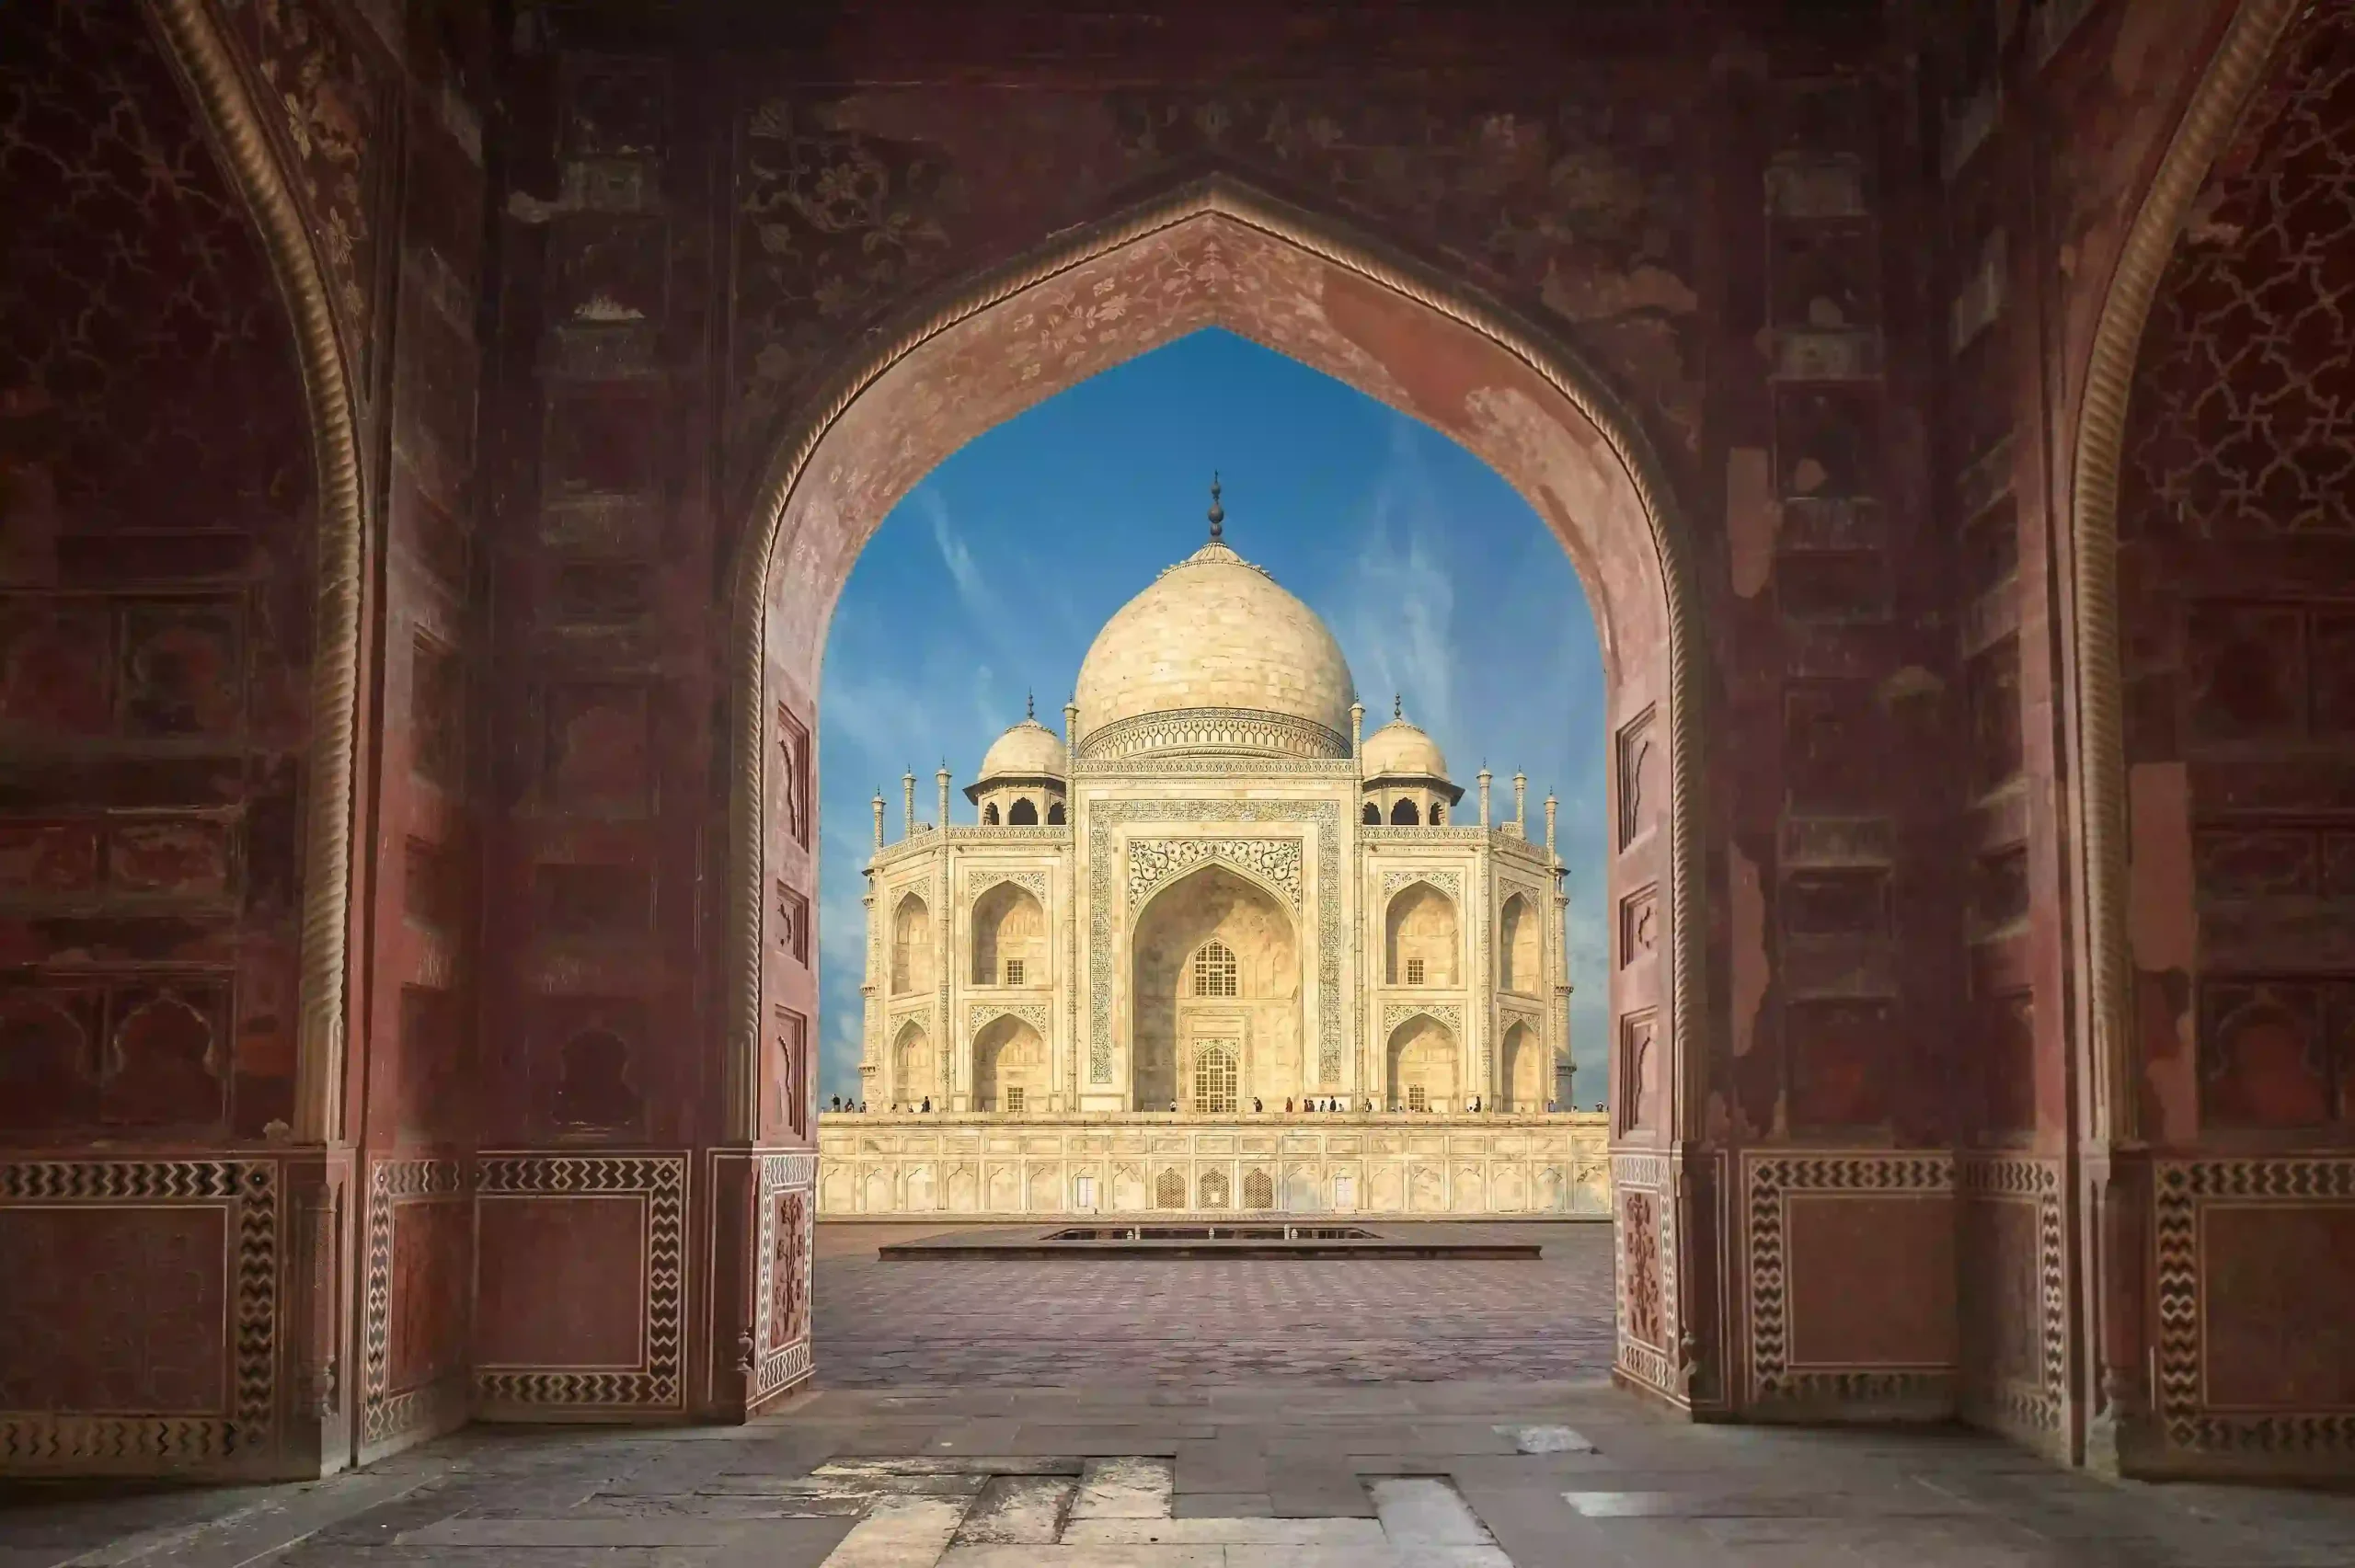 Agra: A Solo Journey through History